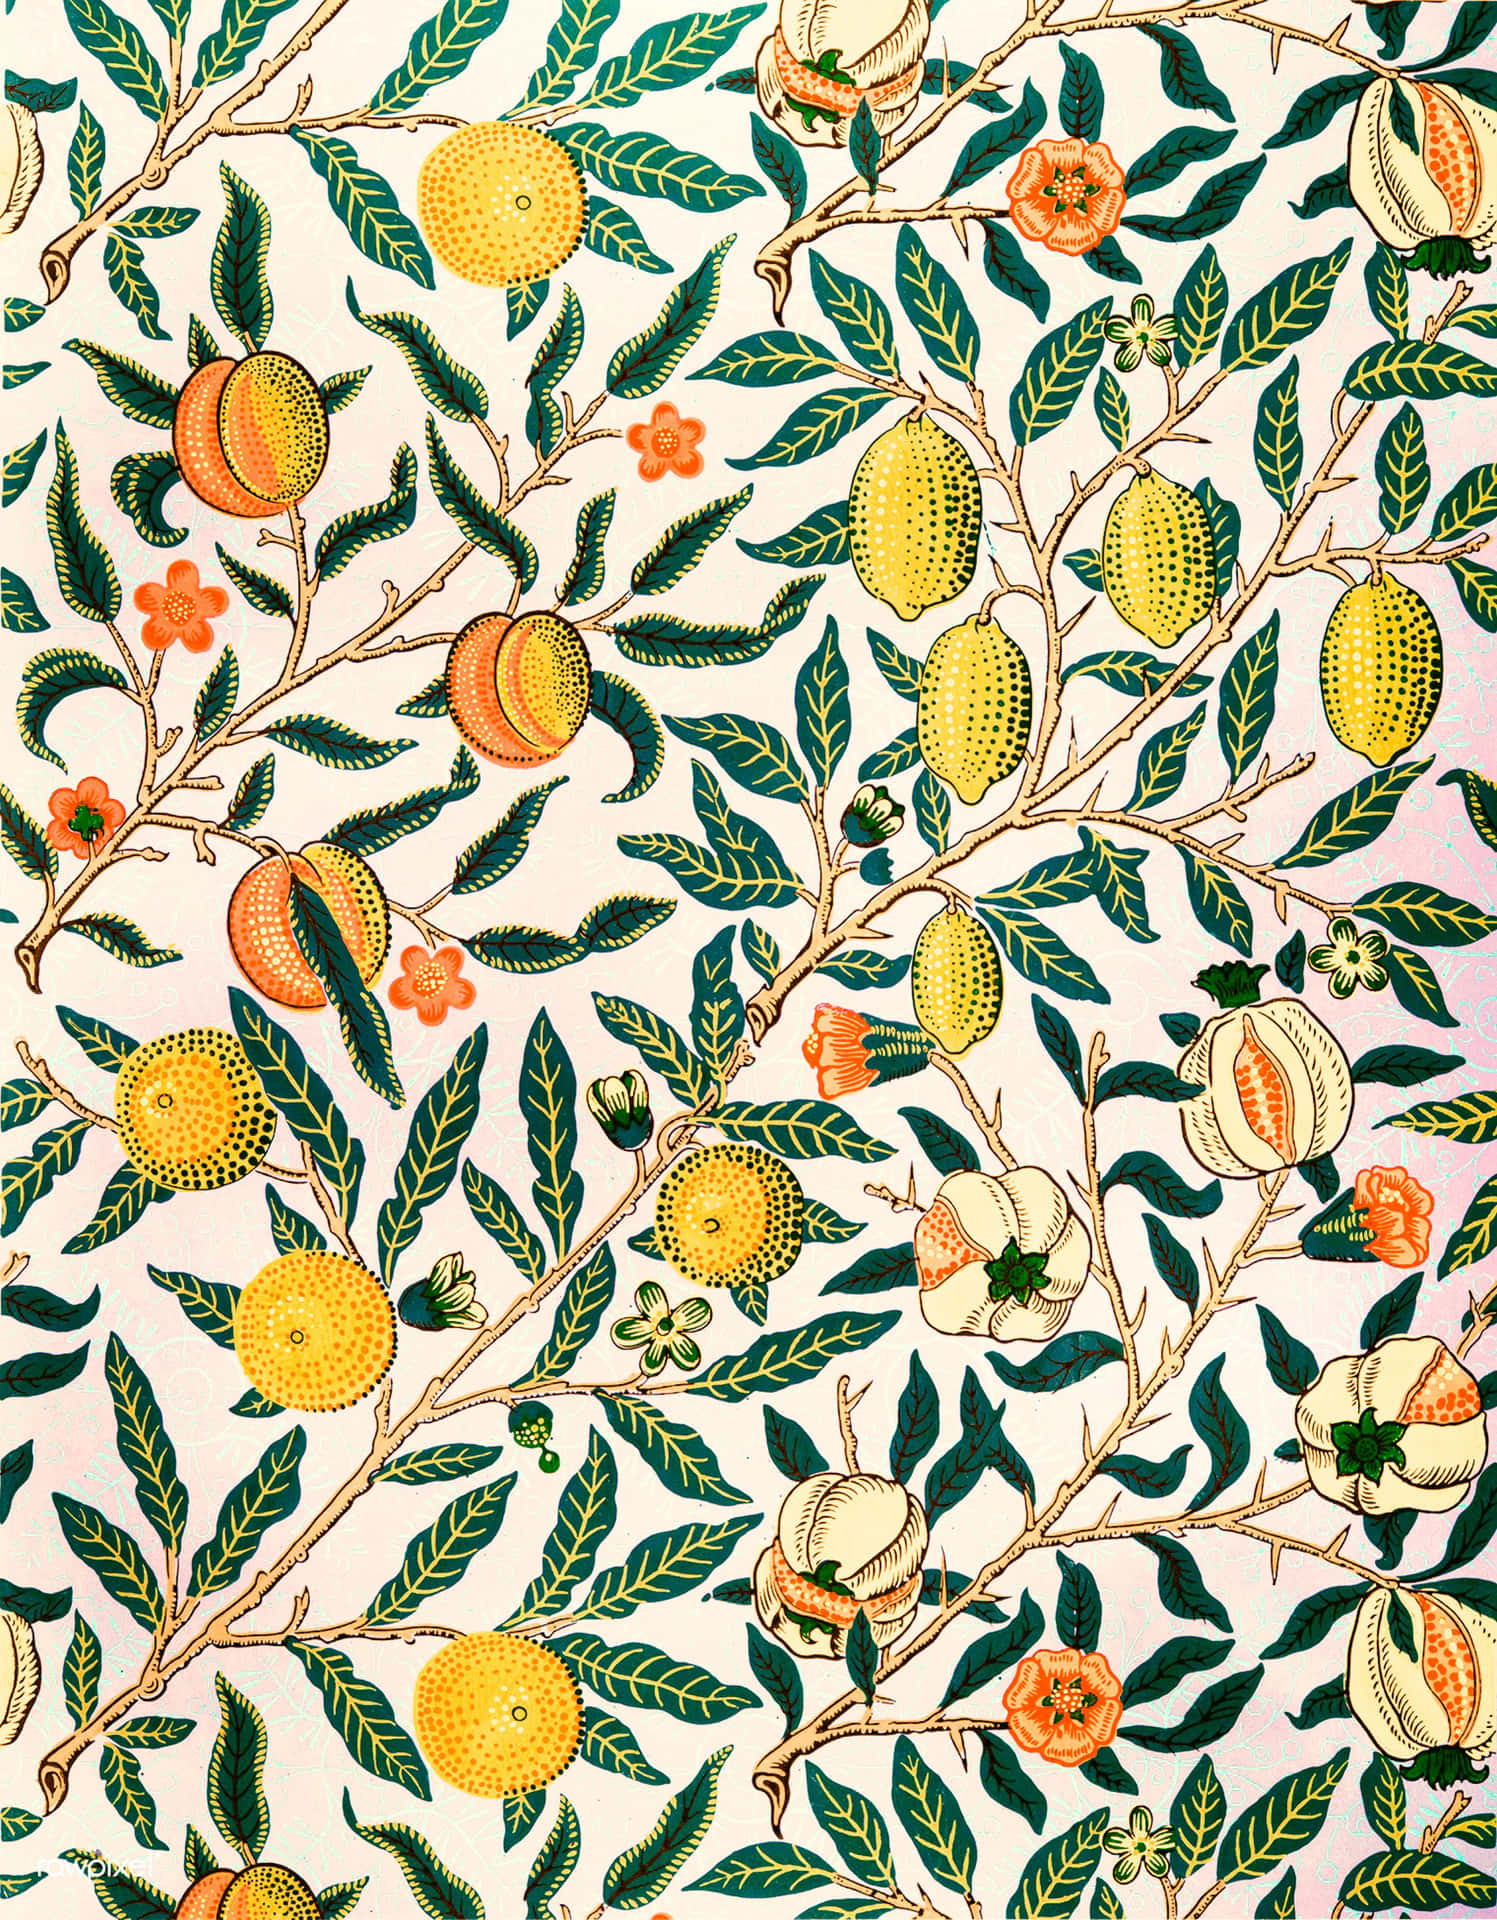 Vintage 60s Pomegranate Fruits And Leaves Wallpaper